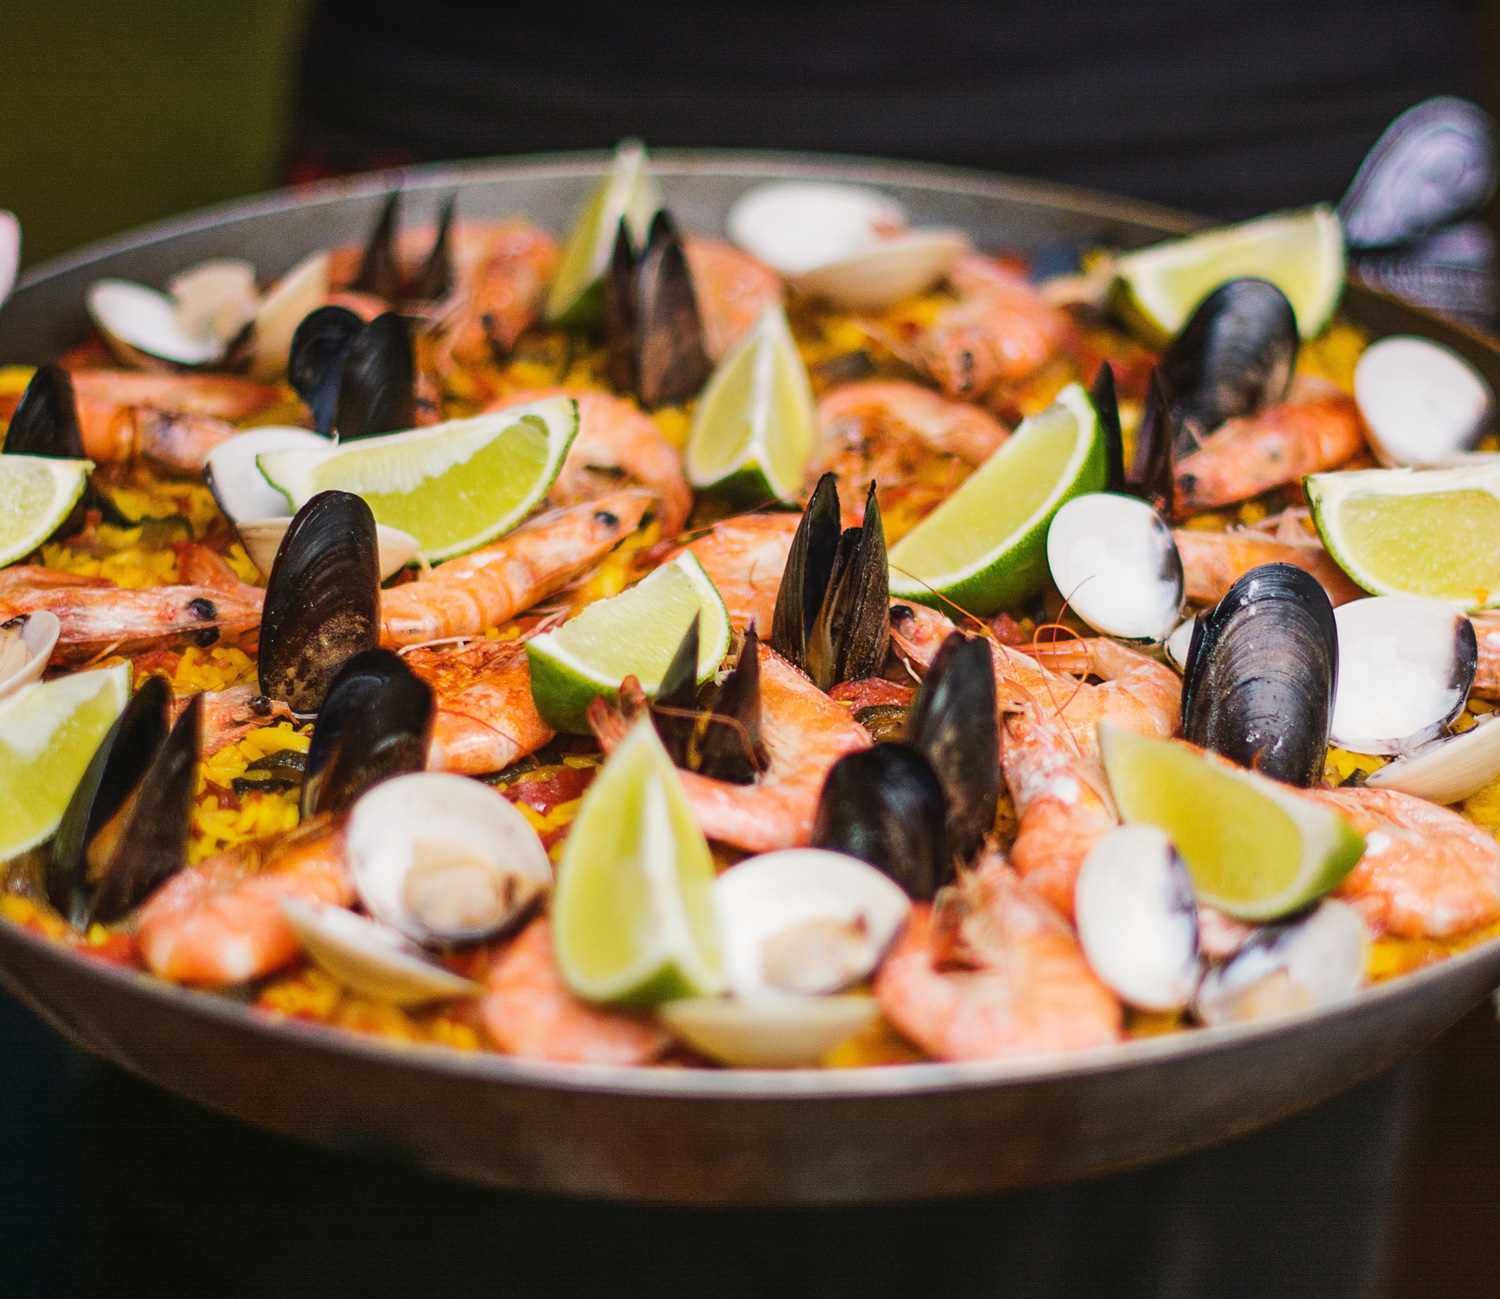 Introducing Paella Pans Weddings Events And Parties Catering Dish Catering 